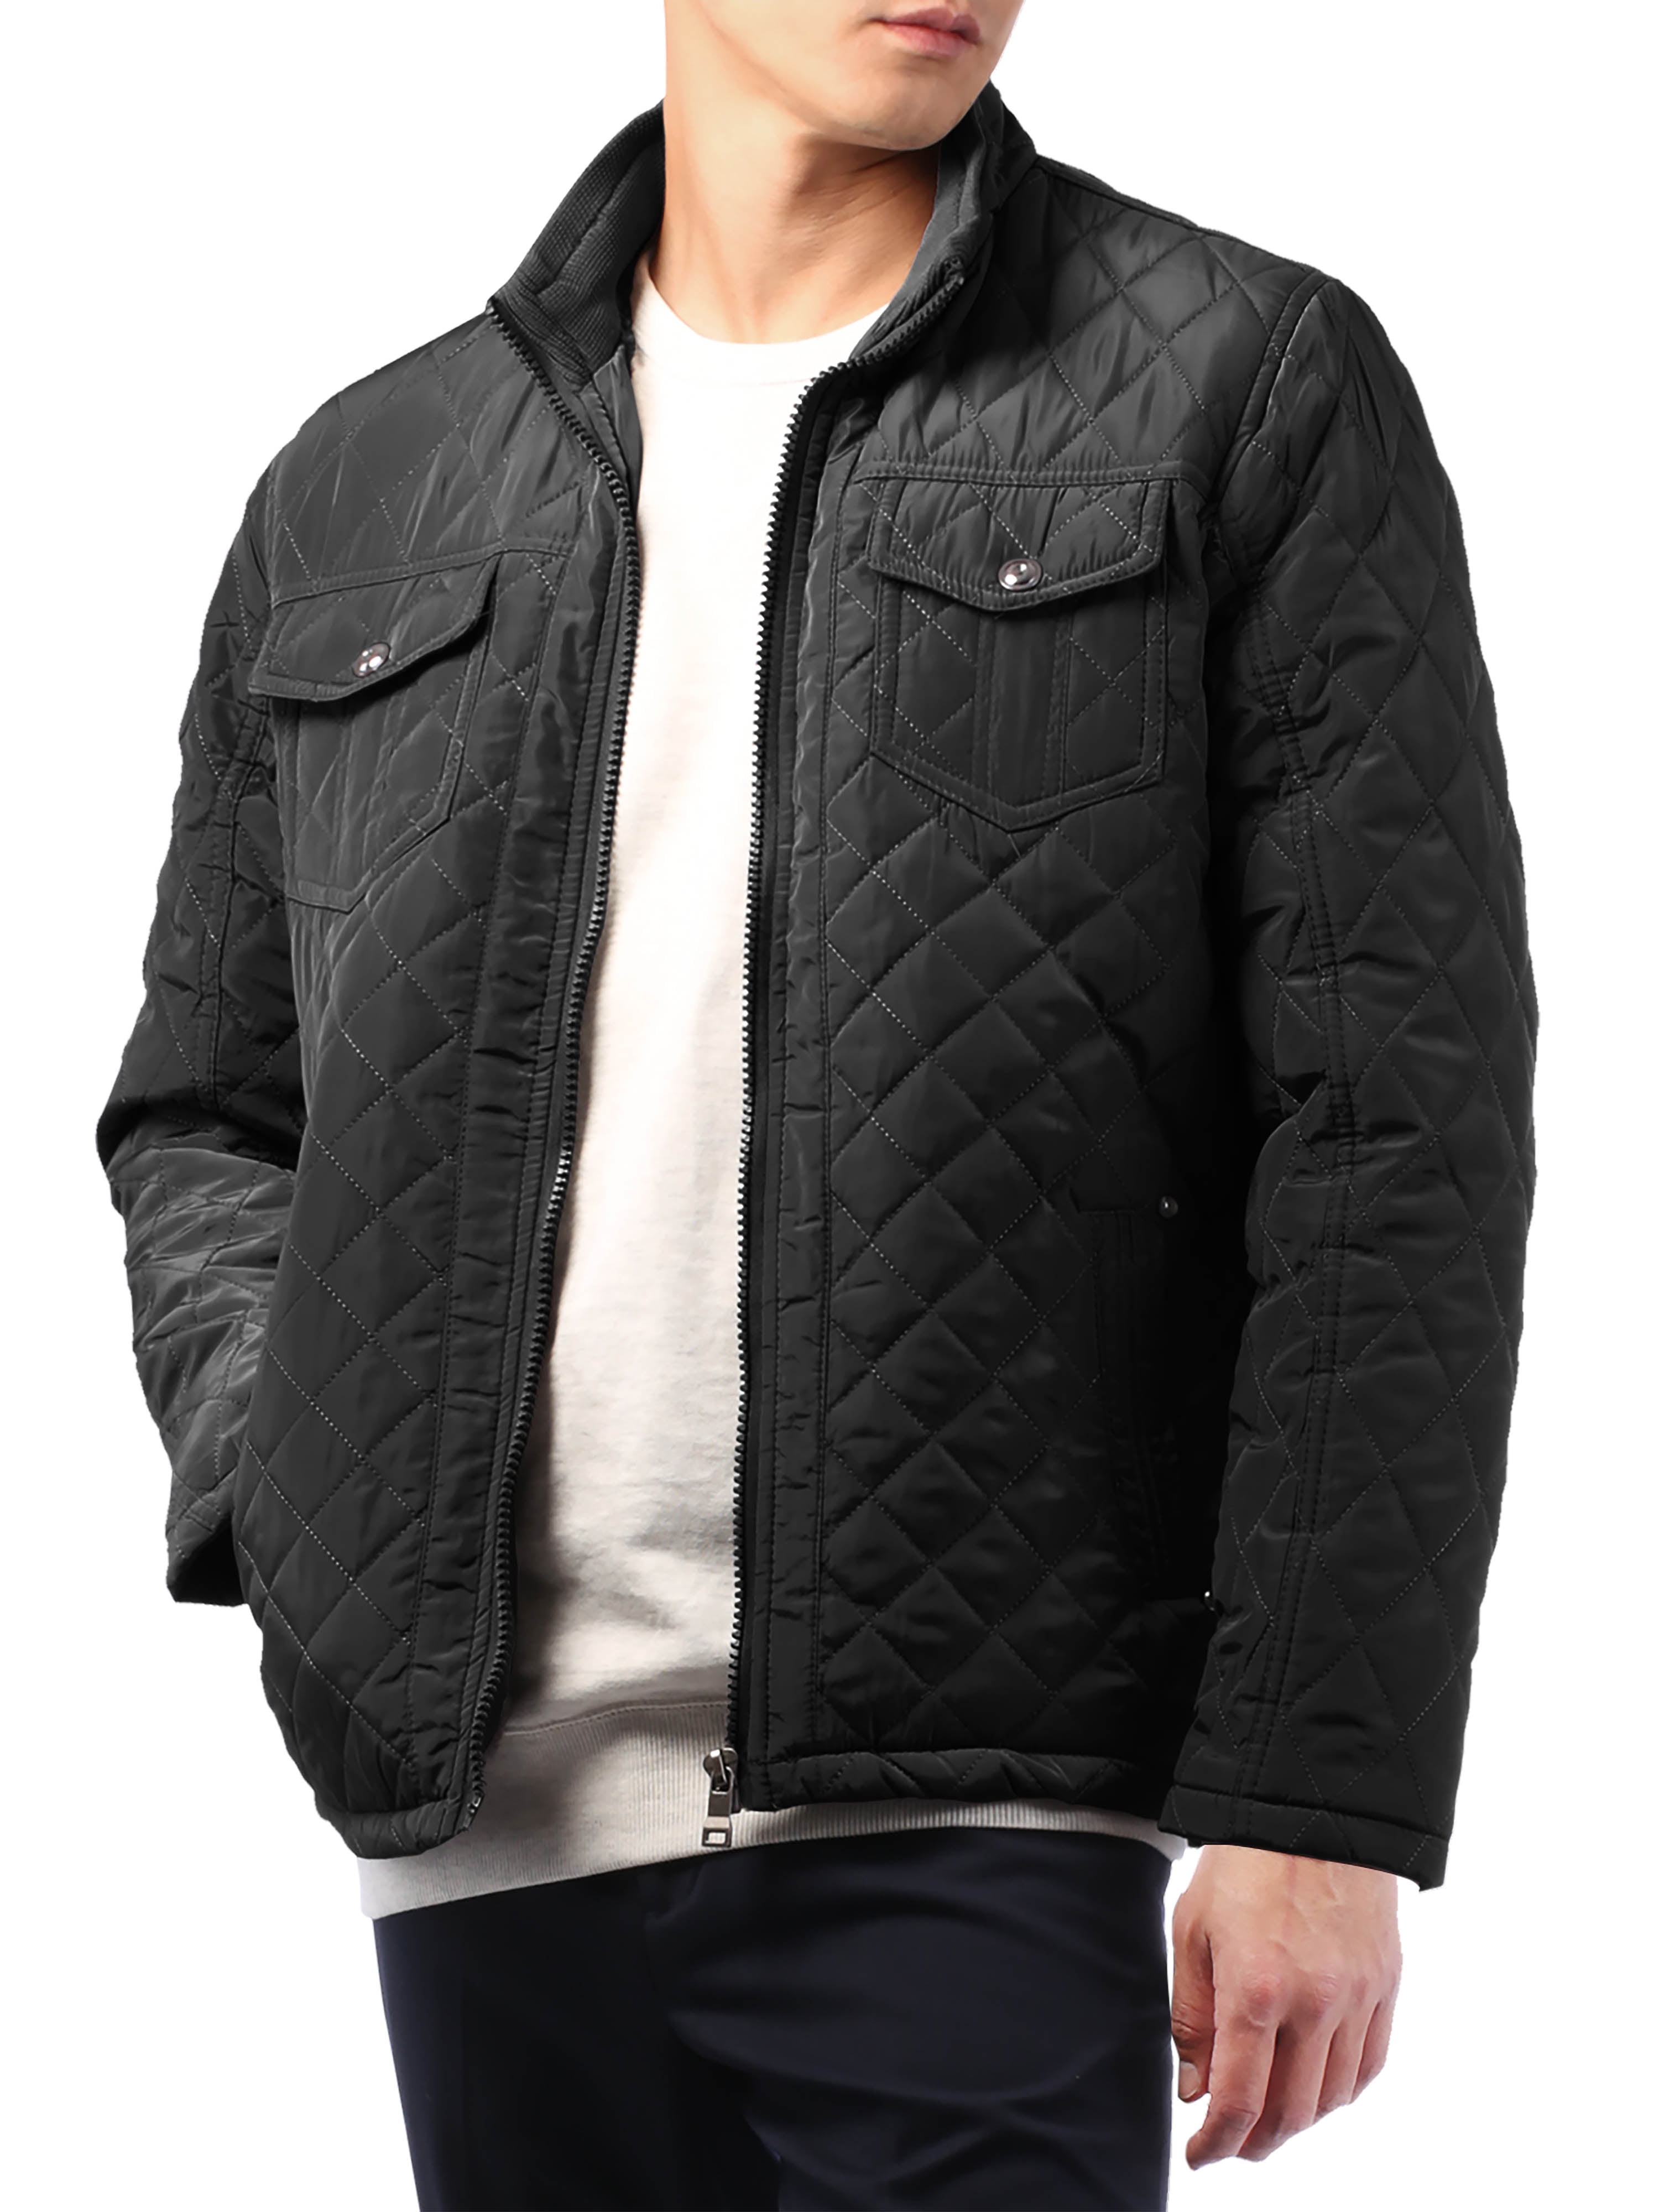 Mens Jacket Crosshatch Coat Hooded Padded Funnel Neck Lined Casual Winter New eBay